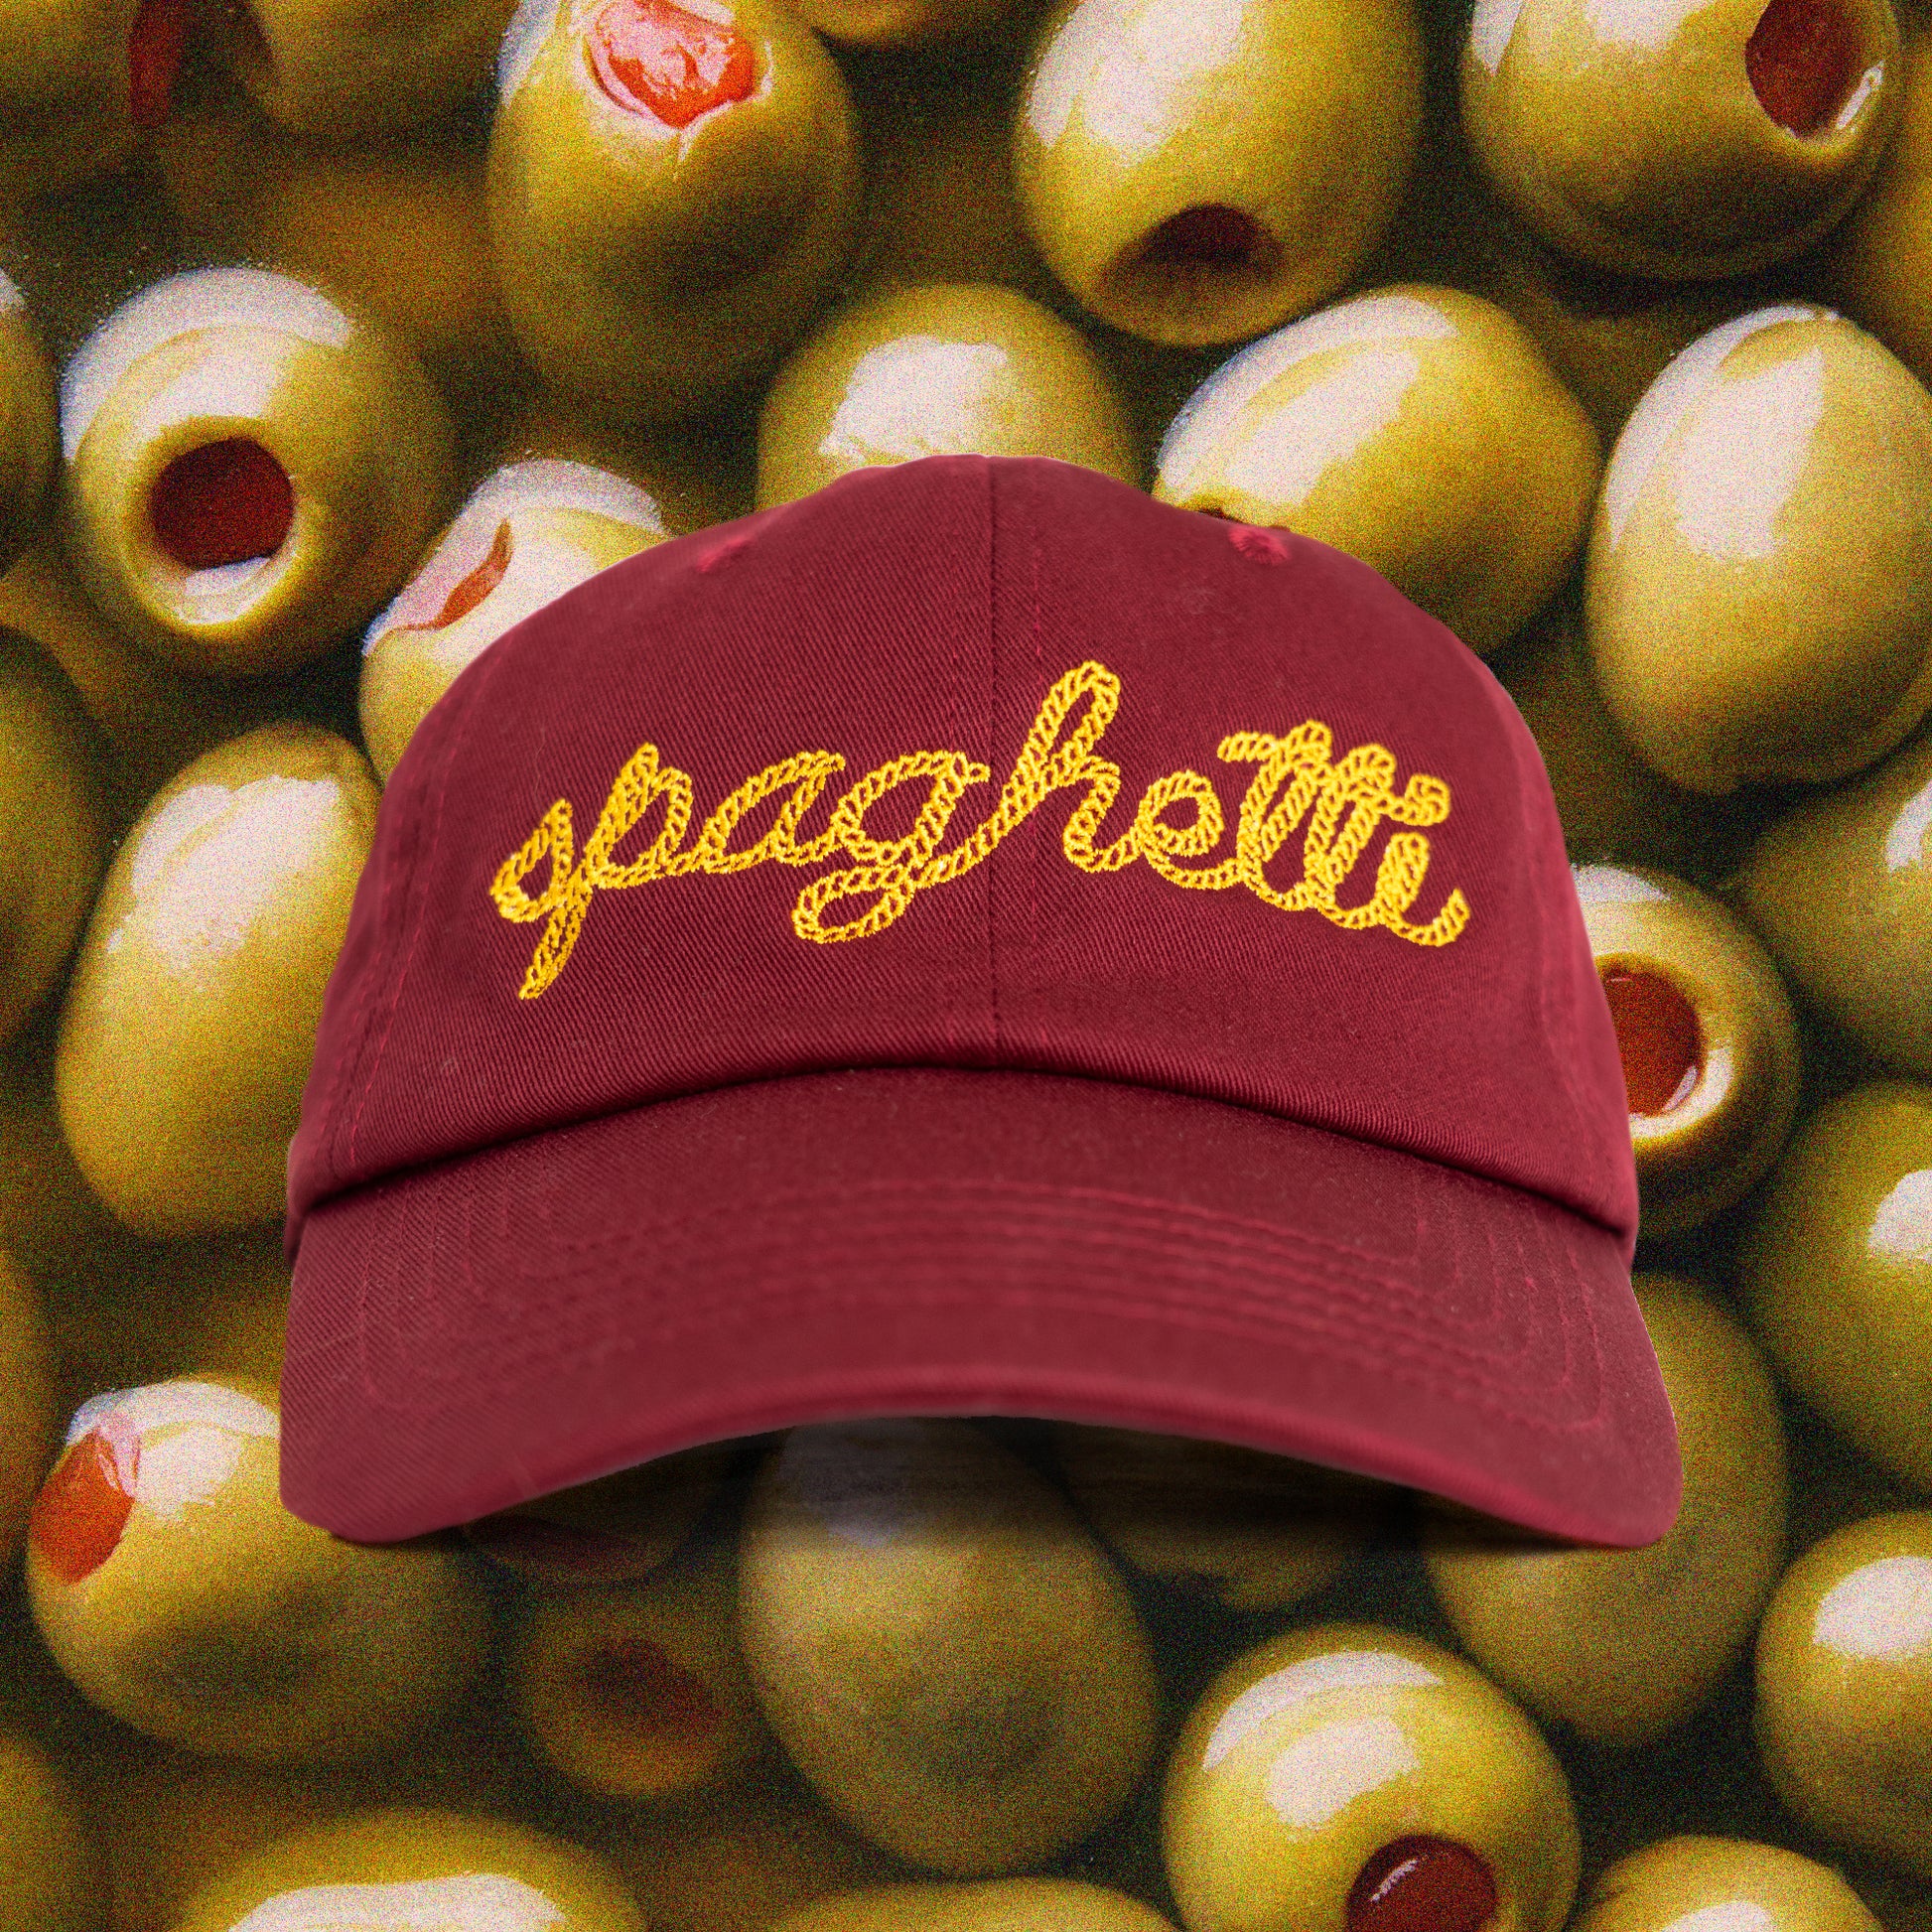 Maroon cap with "spaghetti" chain stitched on the front in yellow 